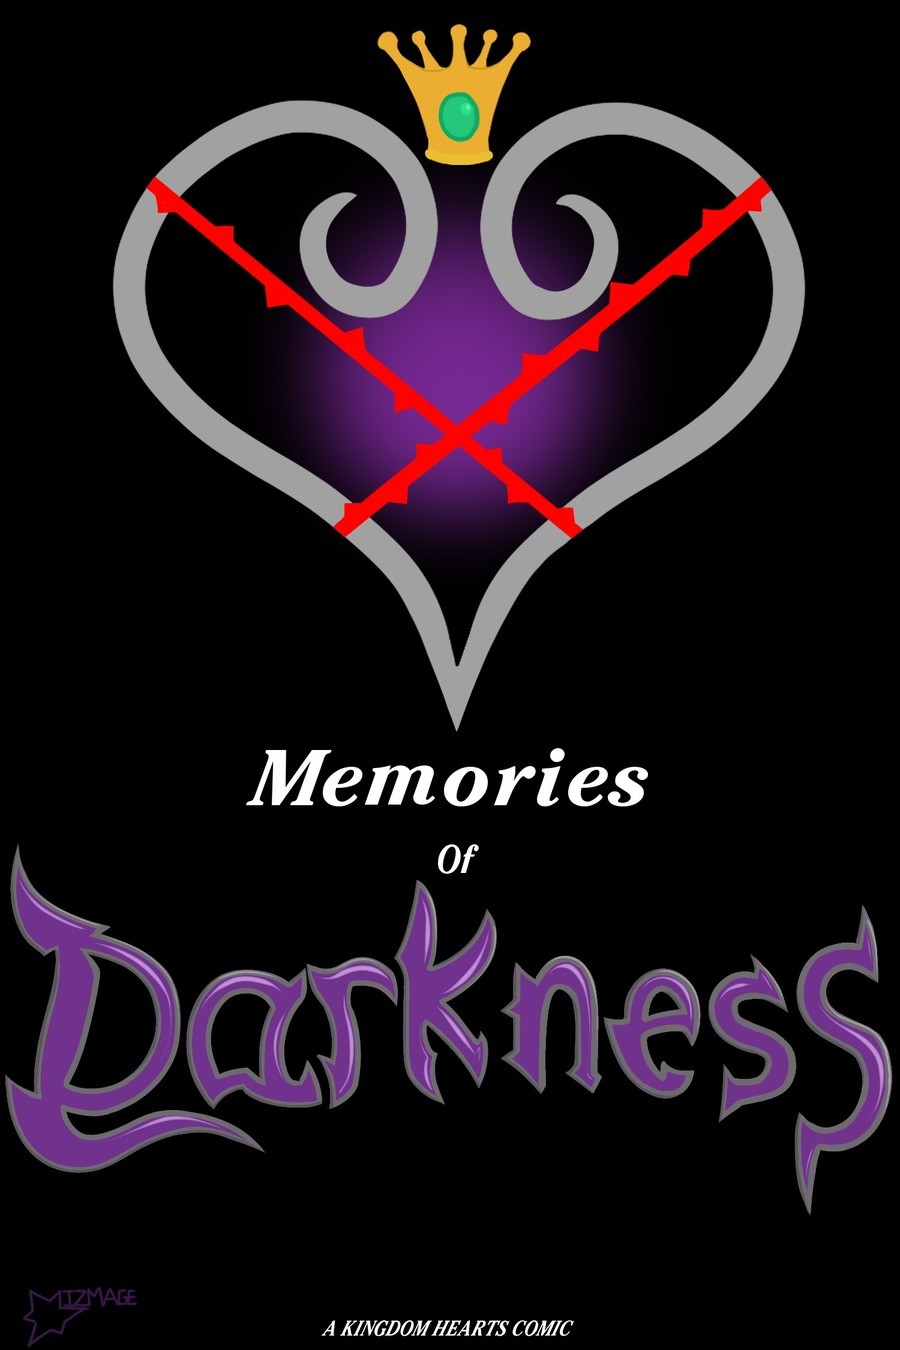 Memories of Darkness Chapter II Part II. Part 2! Finally. Alsaka net makes upload speed go e h h h u h h h. So lets talk about this. First time i've ever done. something something long post